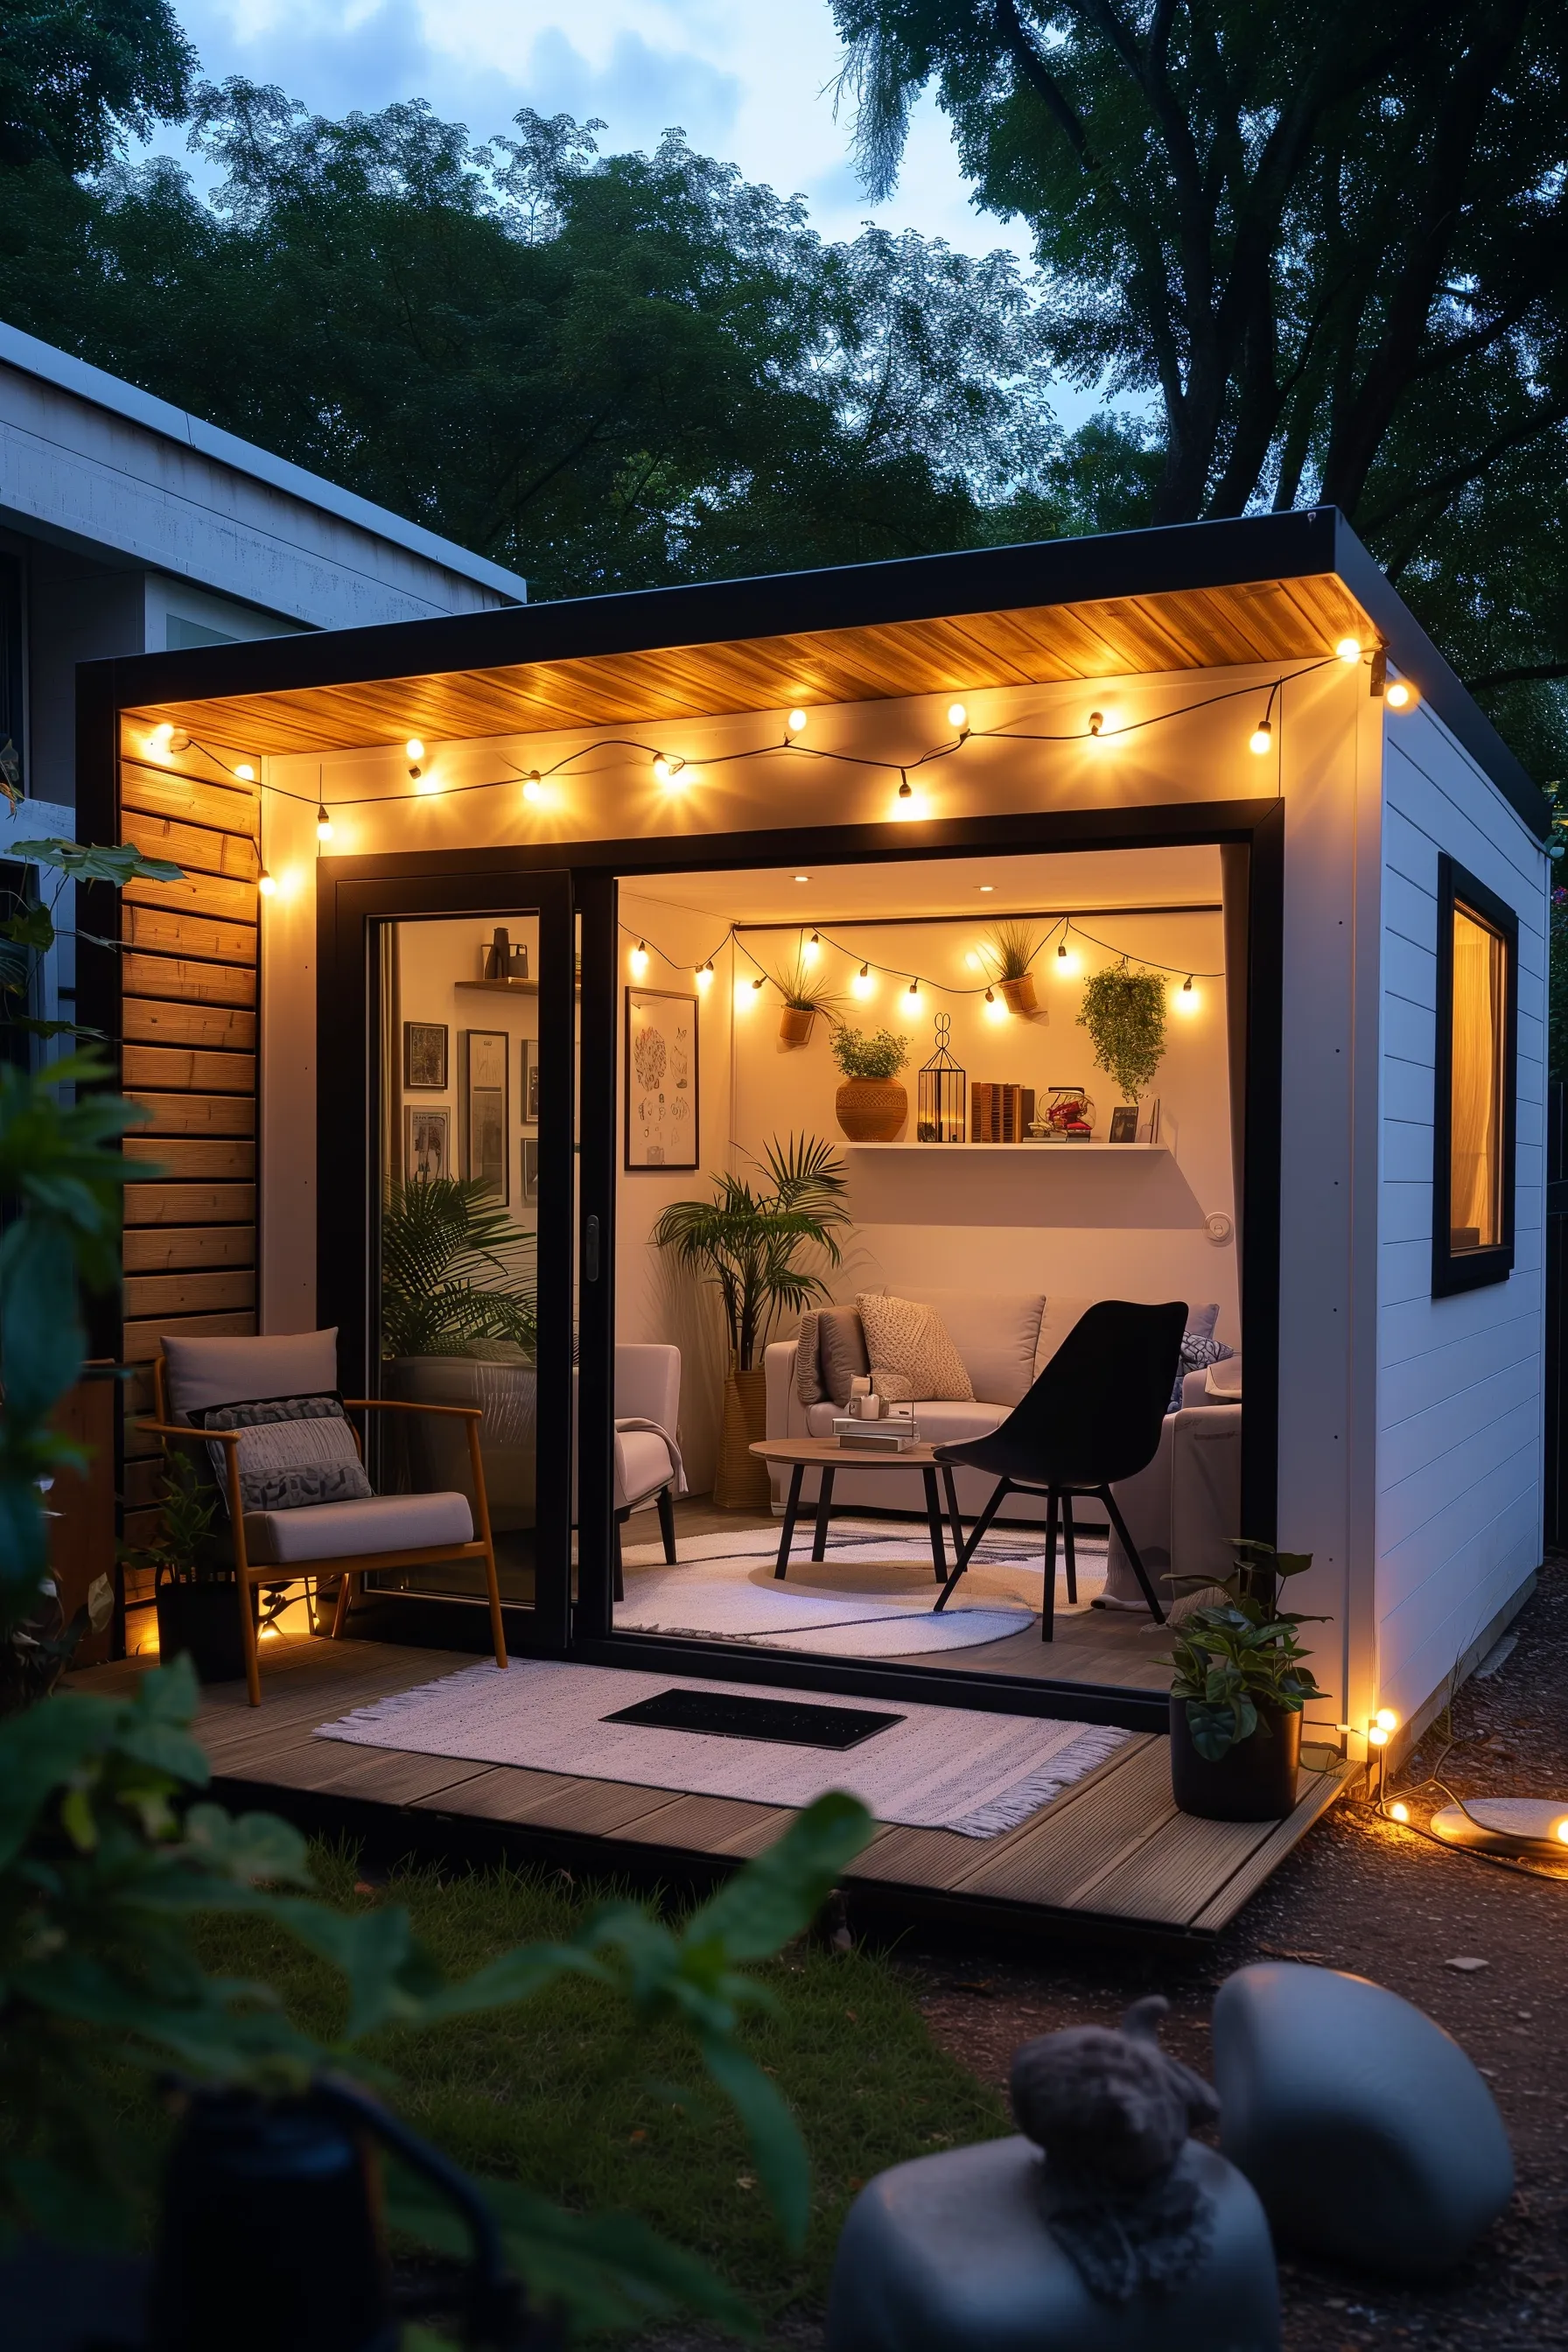 An outdoor shed with fairy lights and furniture